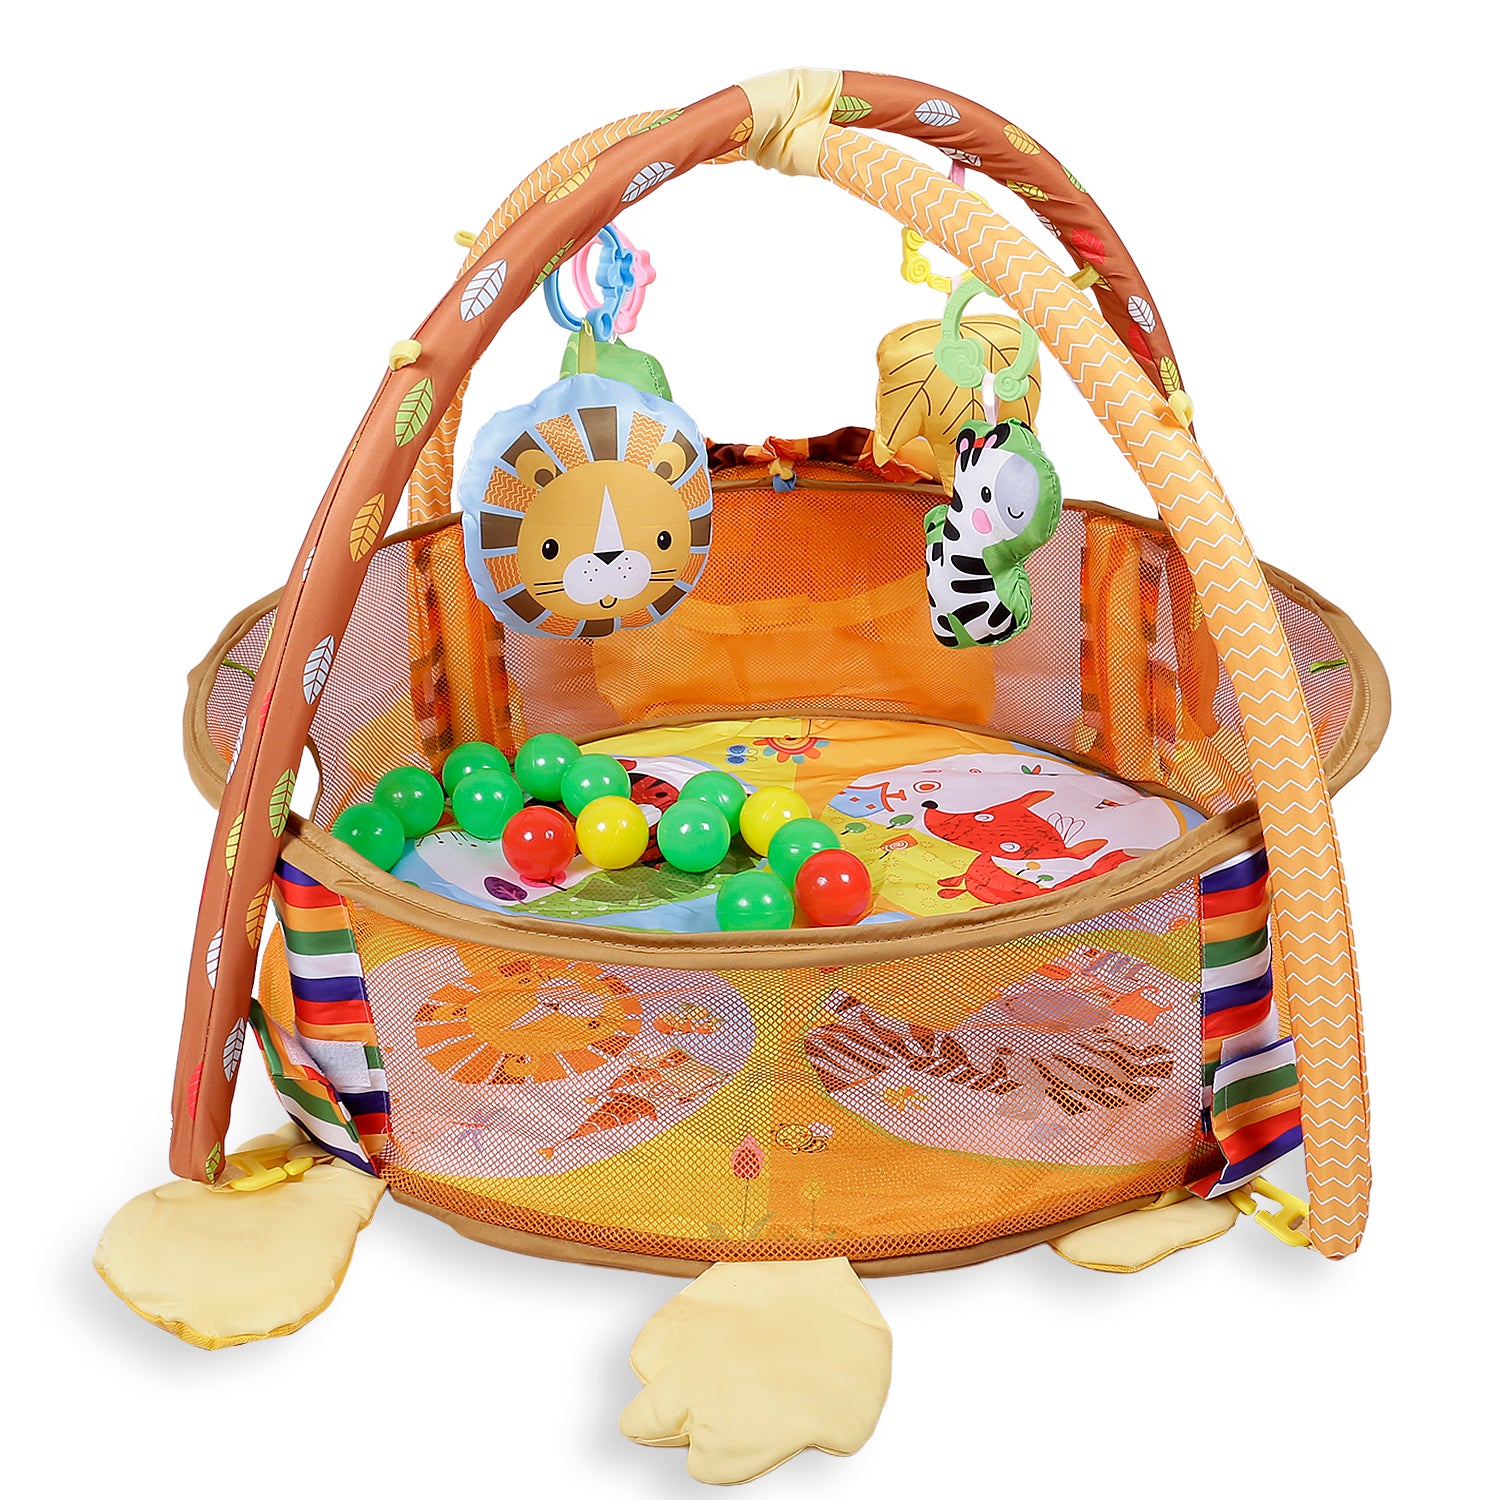 Baby Moo Lion Infant Play Mat Activity Gym With Hanging Toys And Balls - Yellow